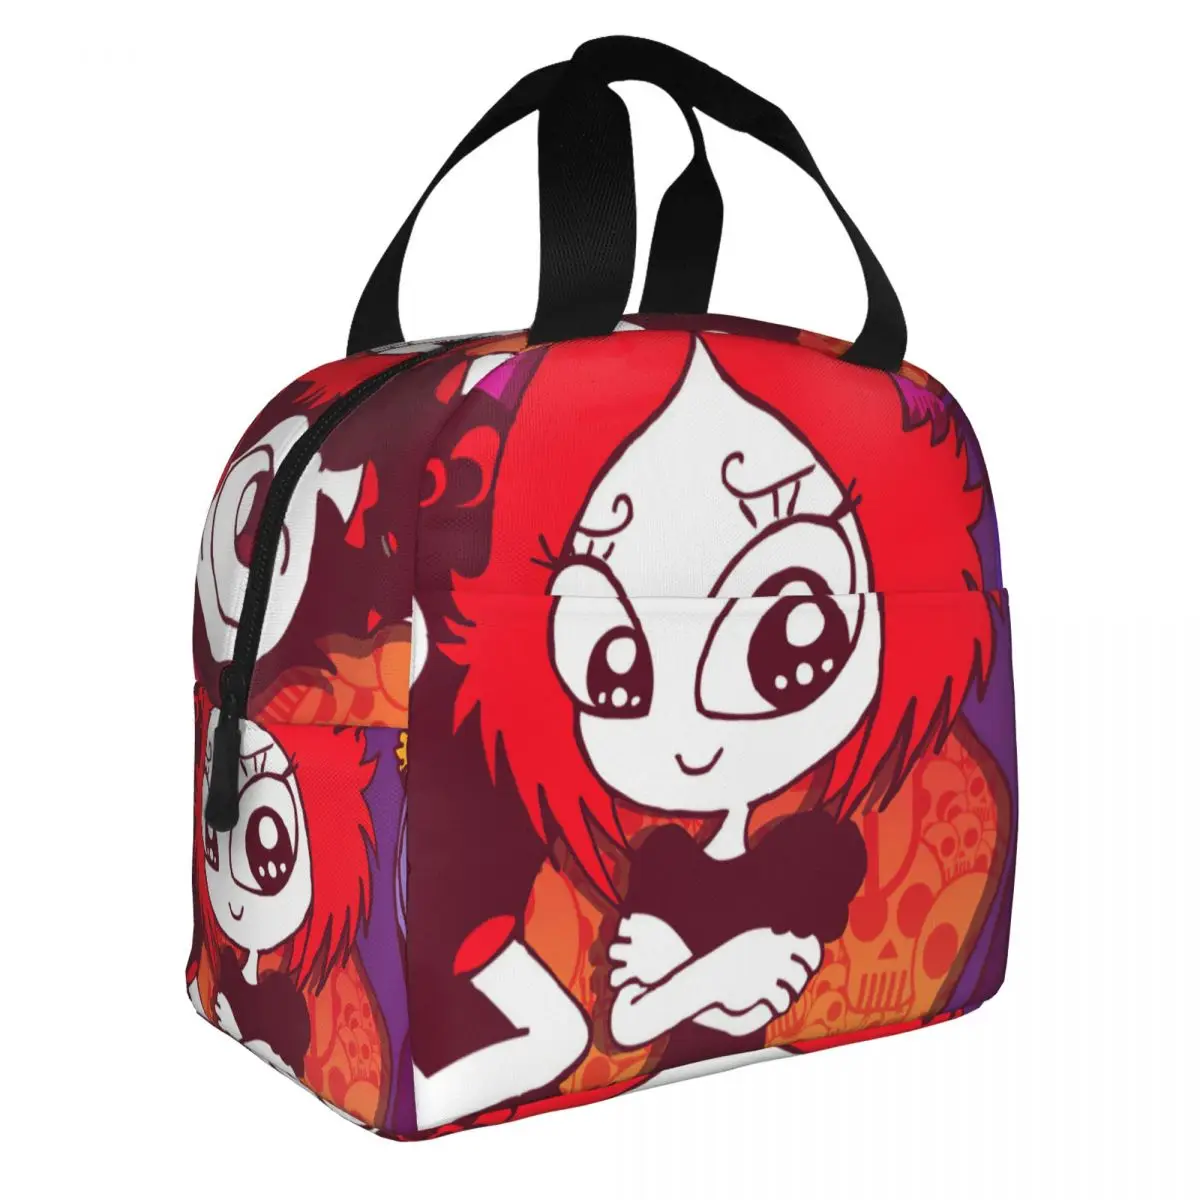 Ruby Gloom Lunch Bento Bags Portable Aluminum Foil thickened Thermal Cloth Lunch Bag for Women Men Boy